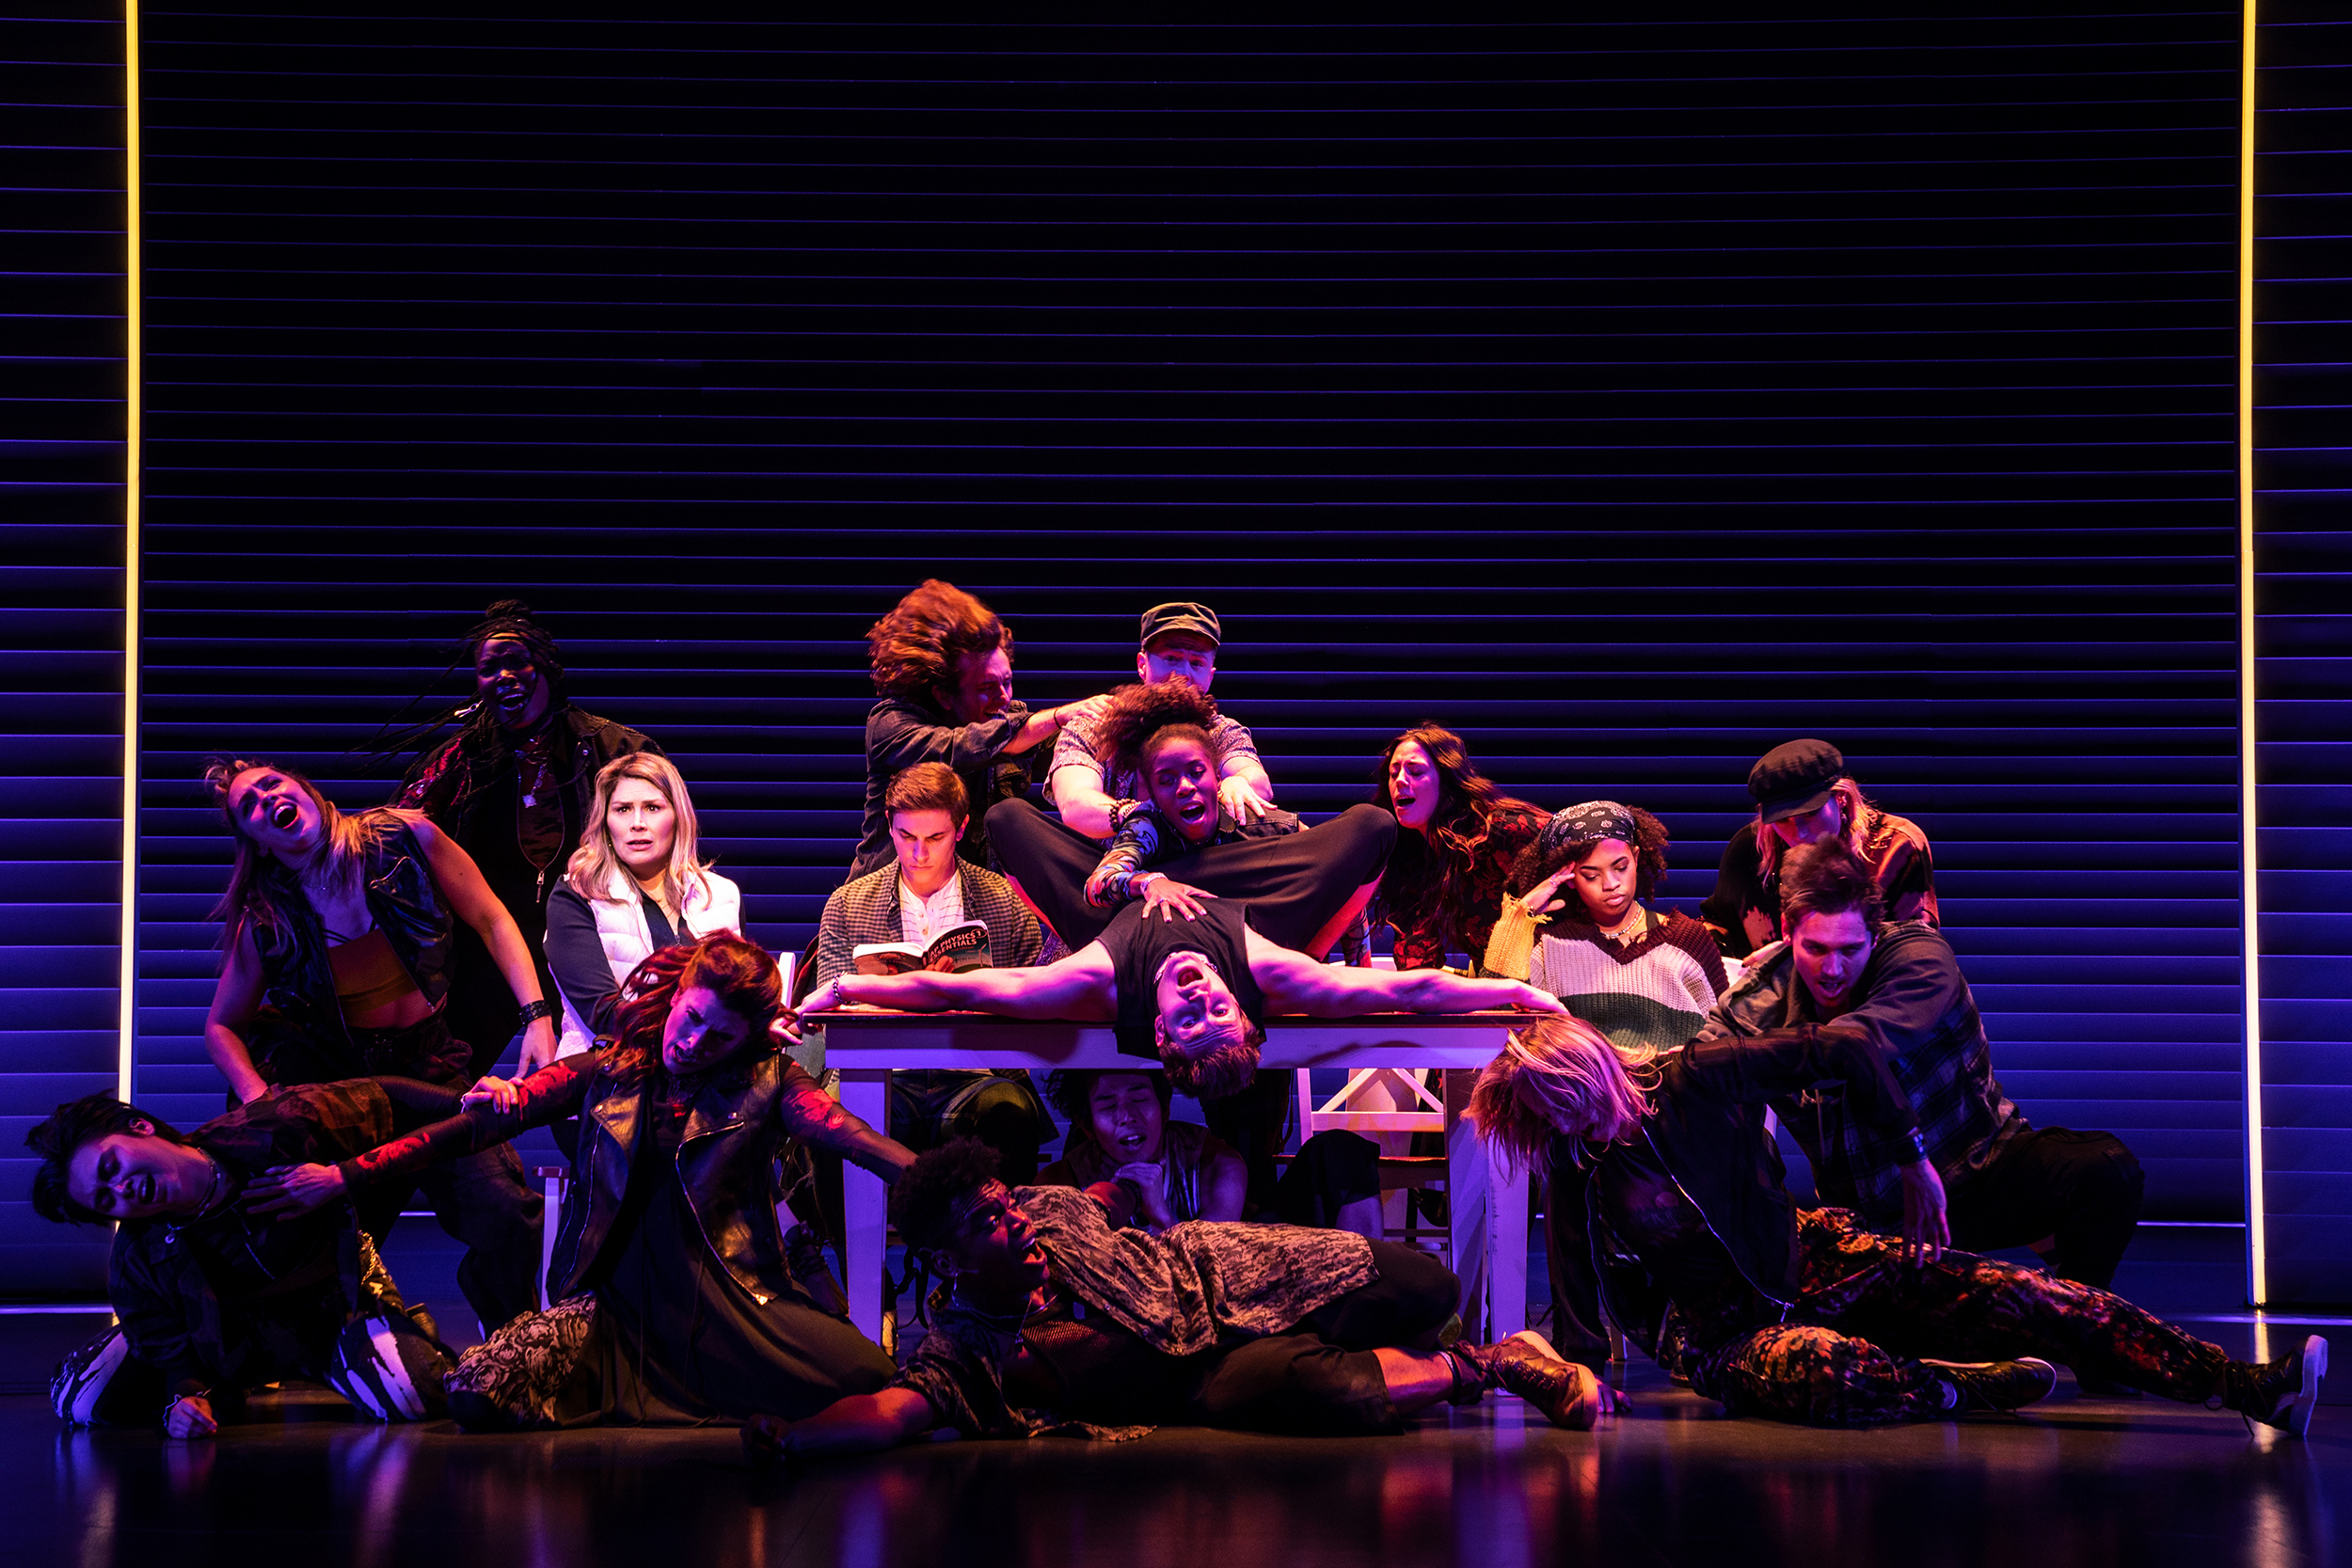 Group of performers contorted around table